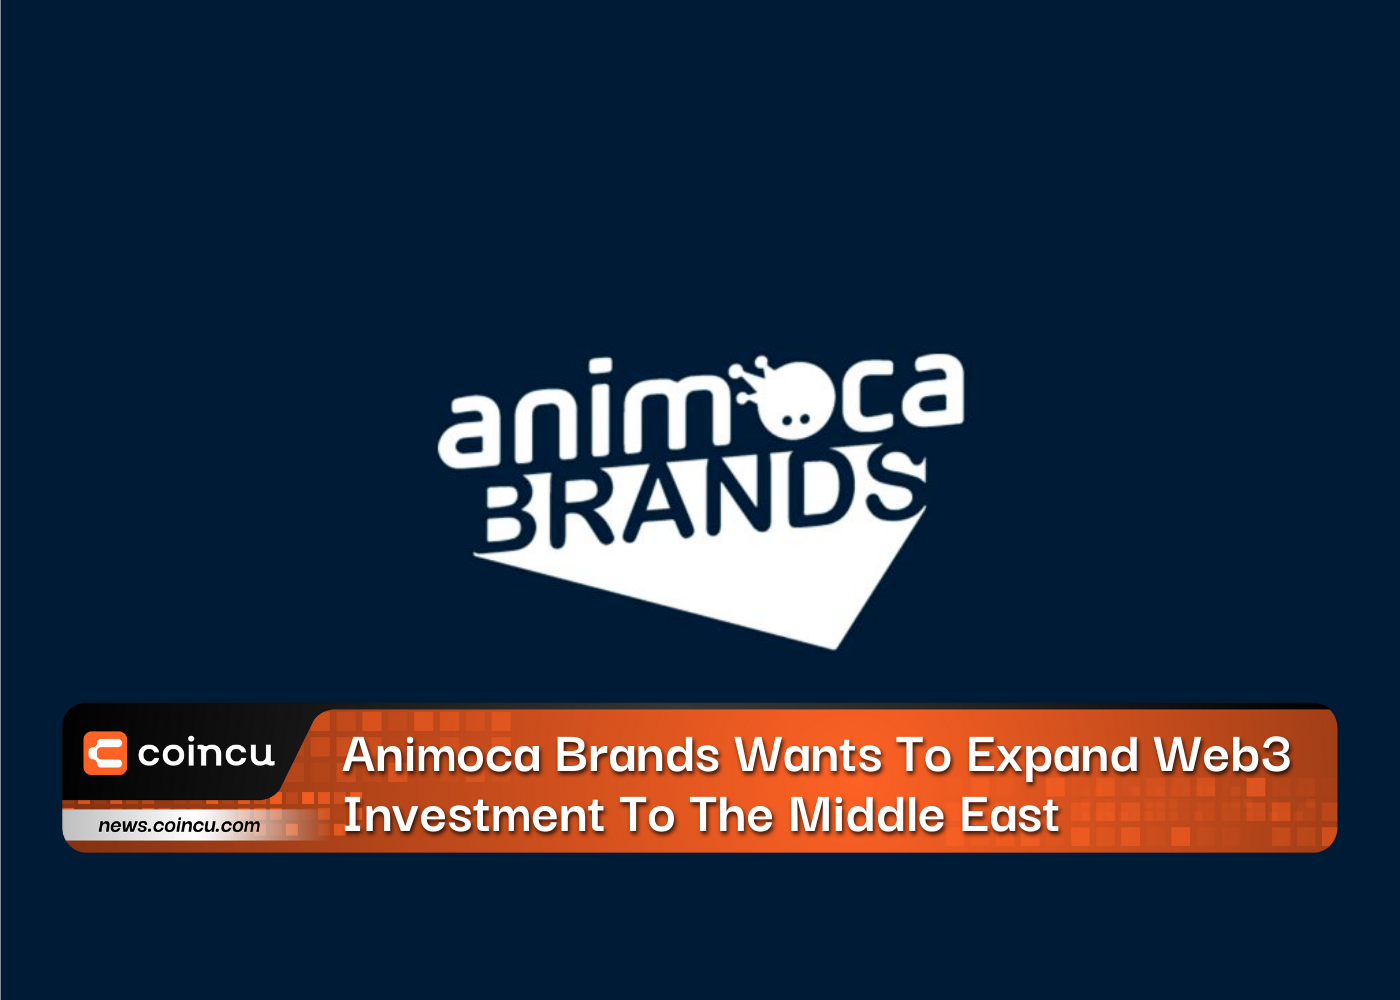 Animoca Brands Wants To Expand Web3 Investment To The Middle East